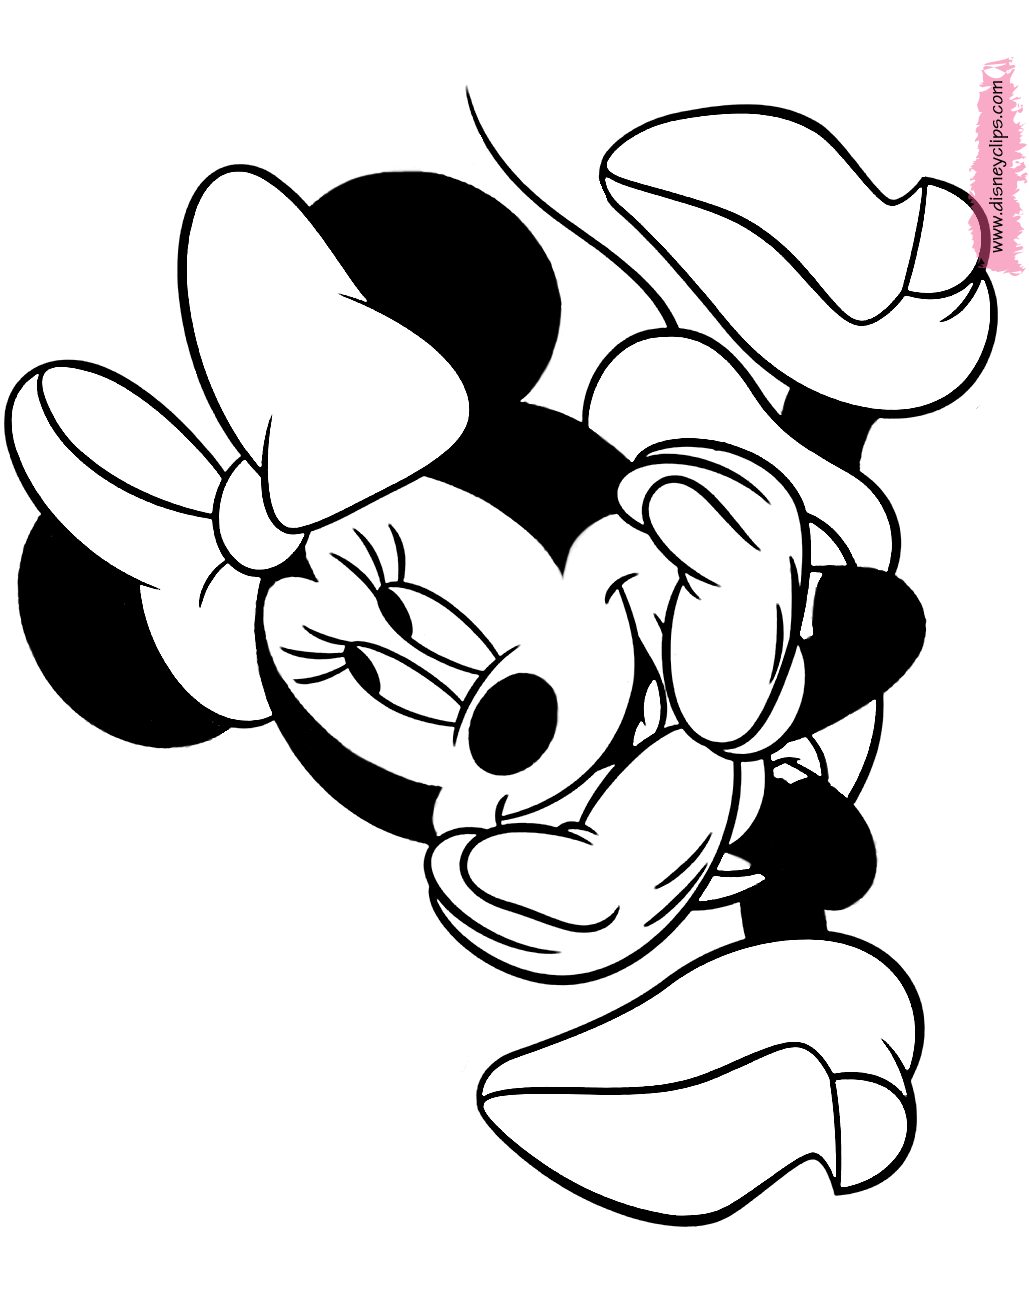 Misc. Minnie Mouse Coloring Pages (7) | Disneyclips.com